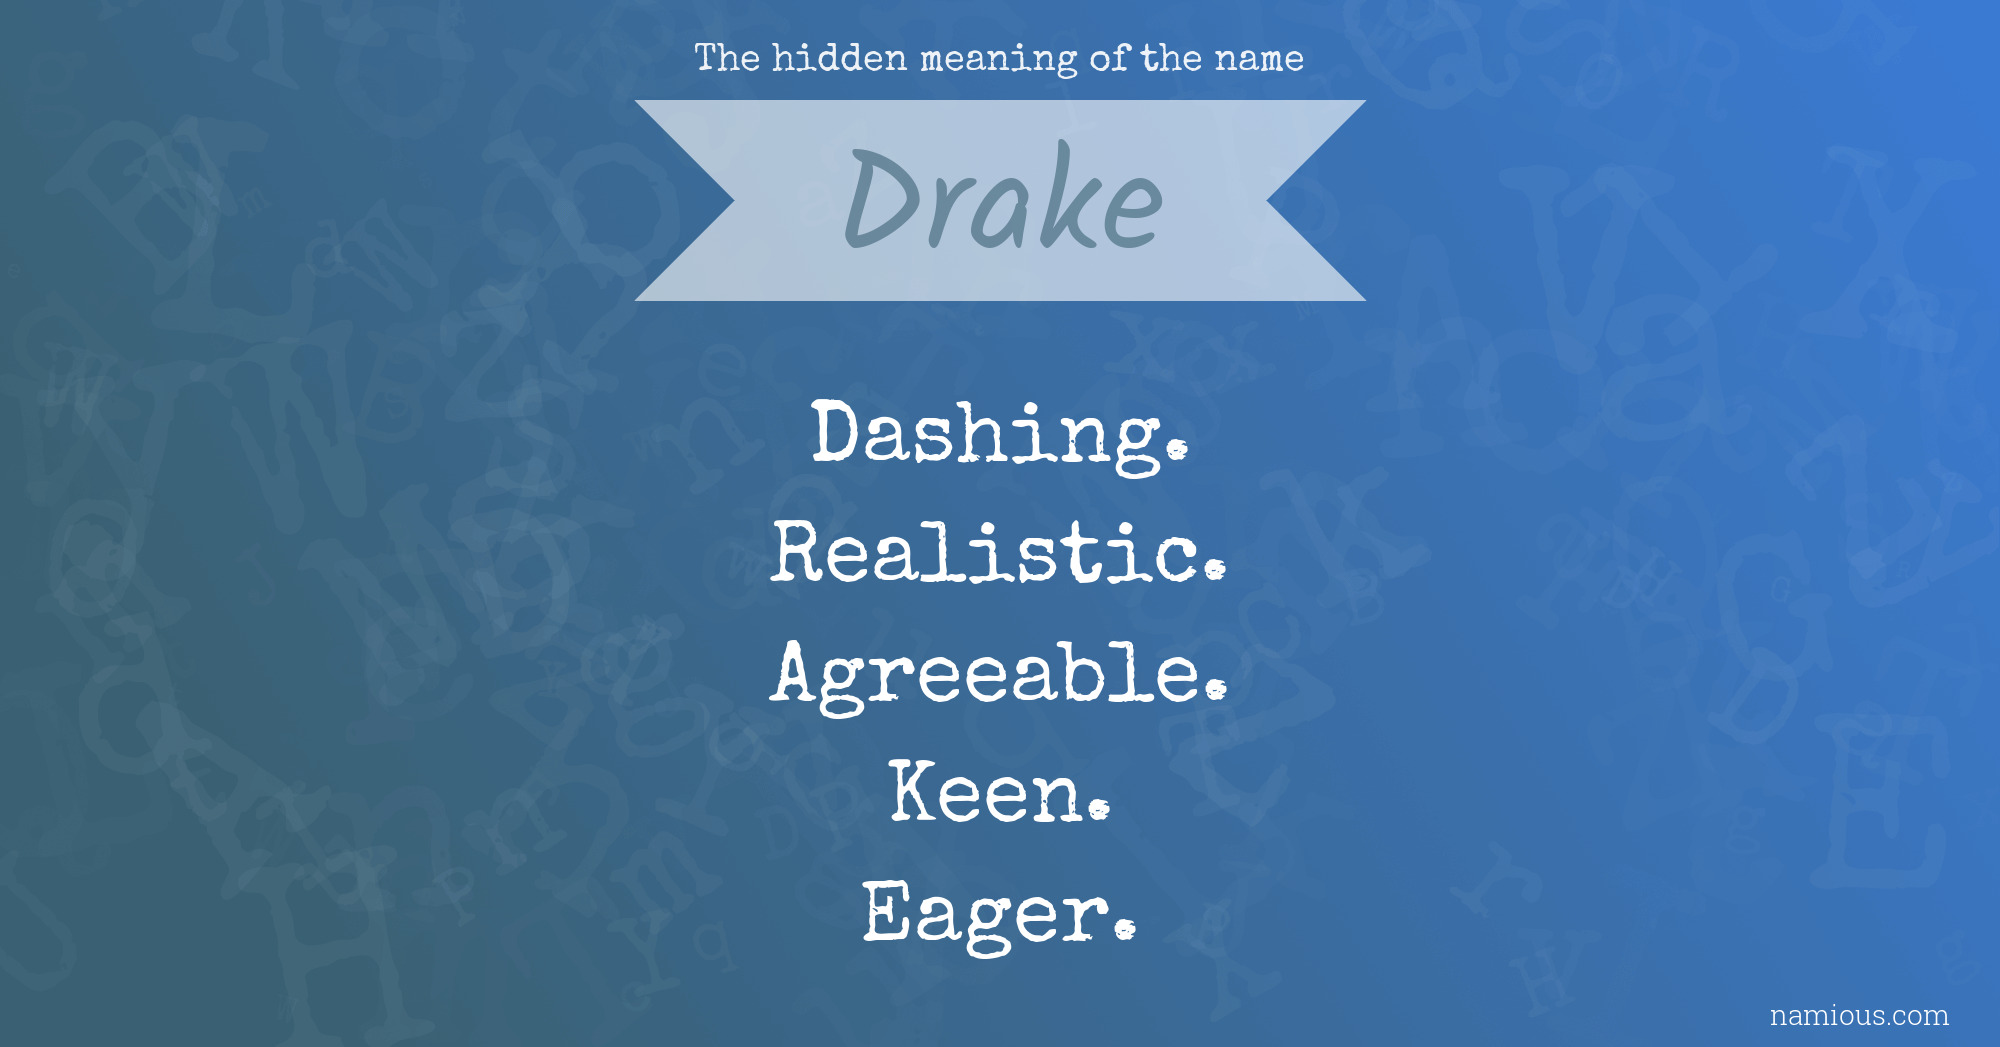 The hidden meaning of the name Drake